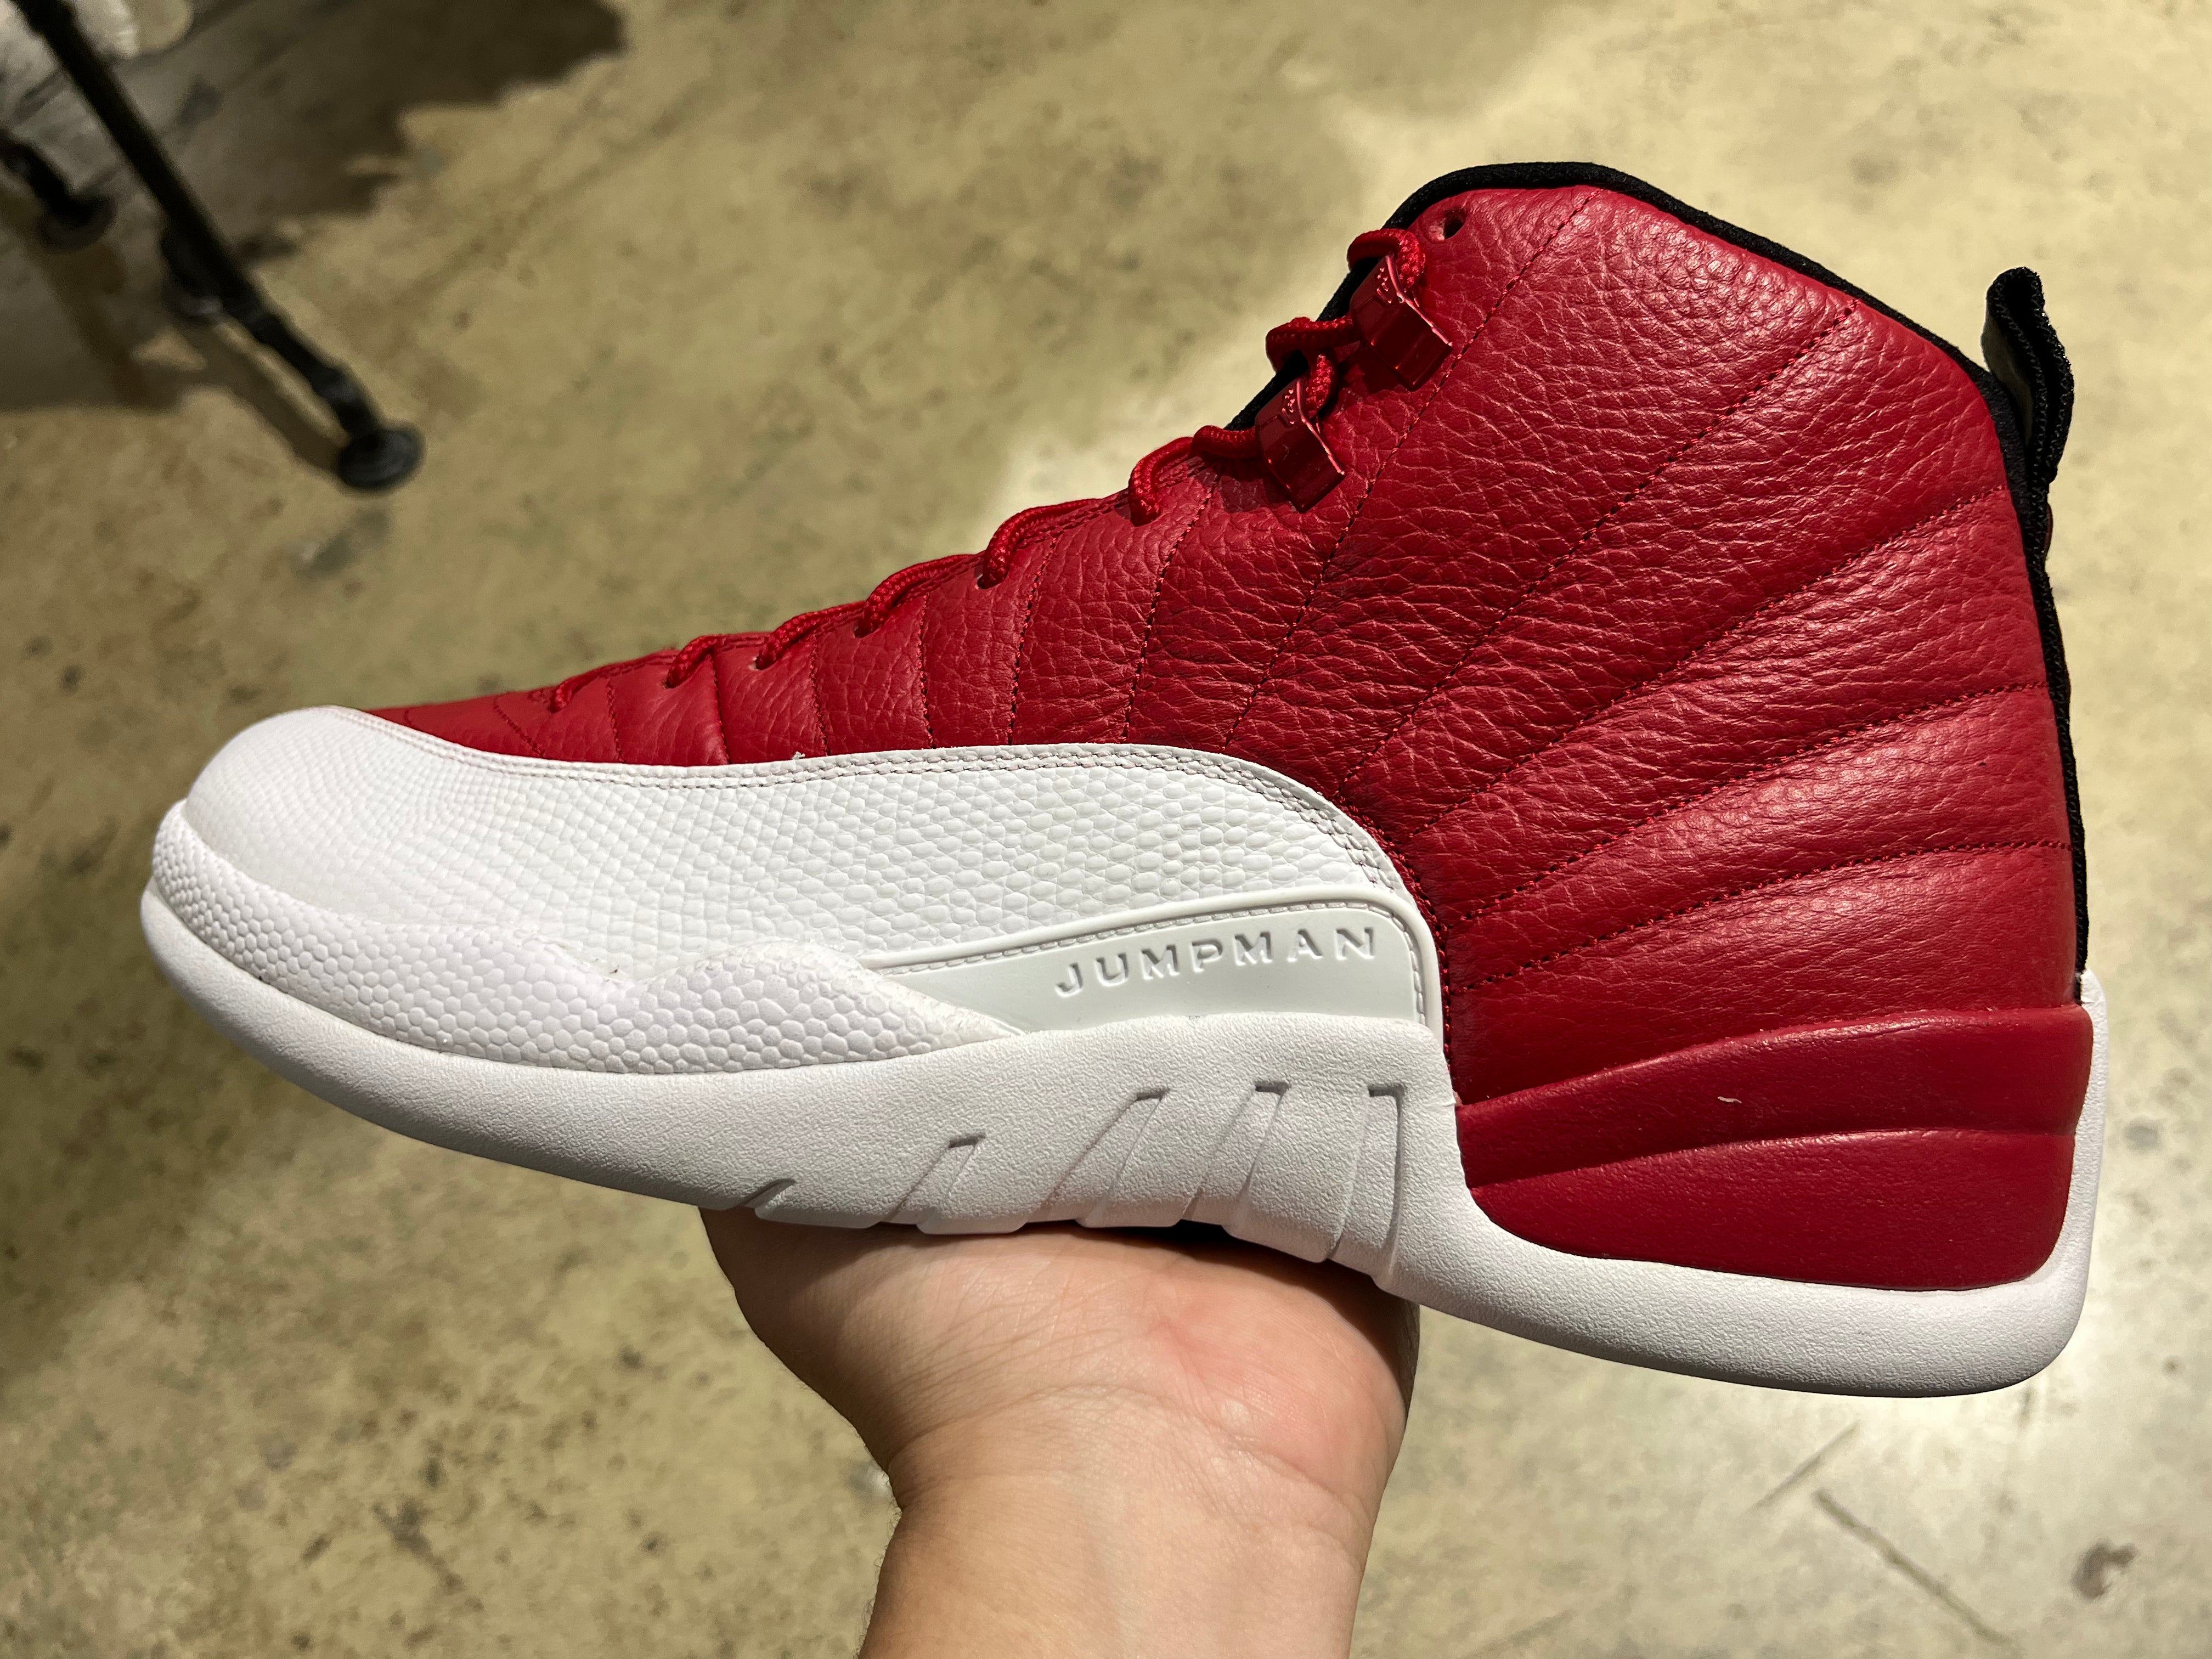 Jordan 13 Retro Gym Red for Sale, Authenticity Guaranteed